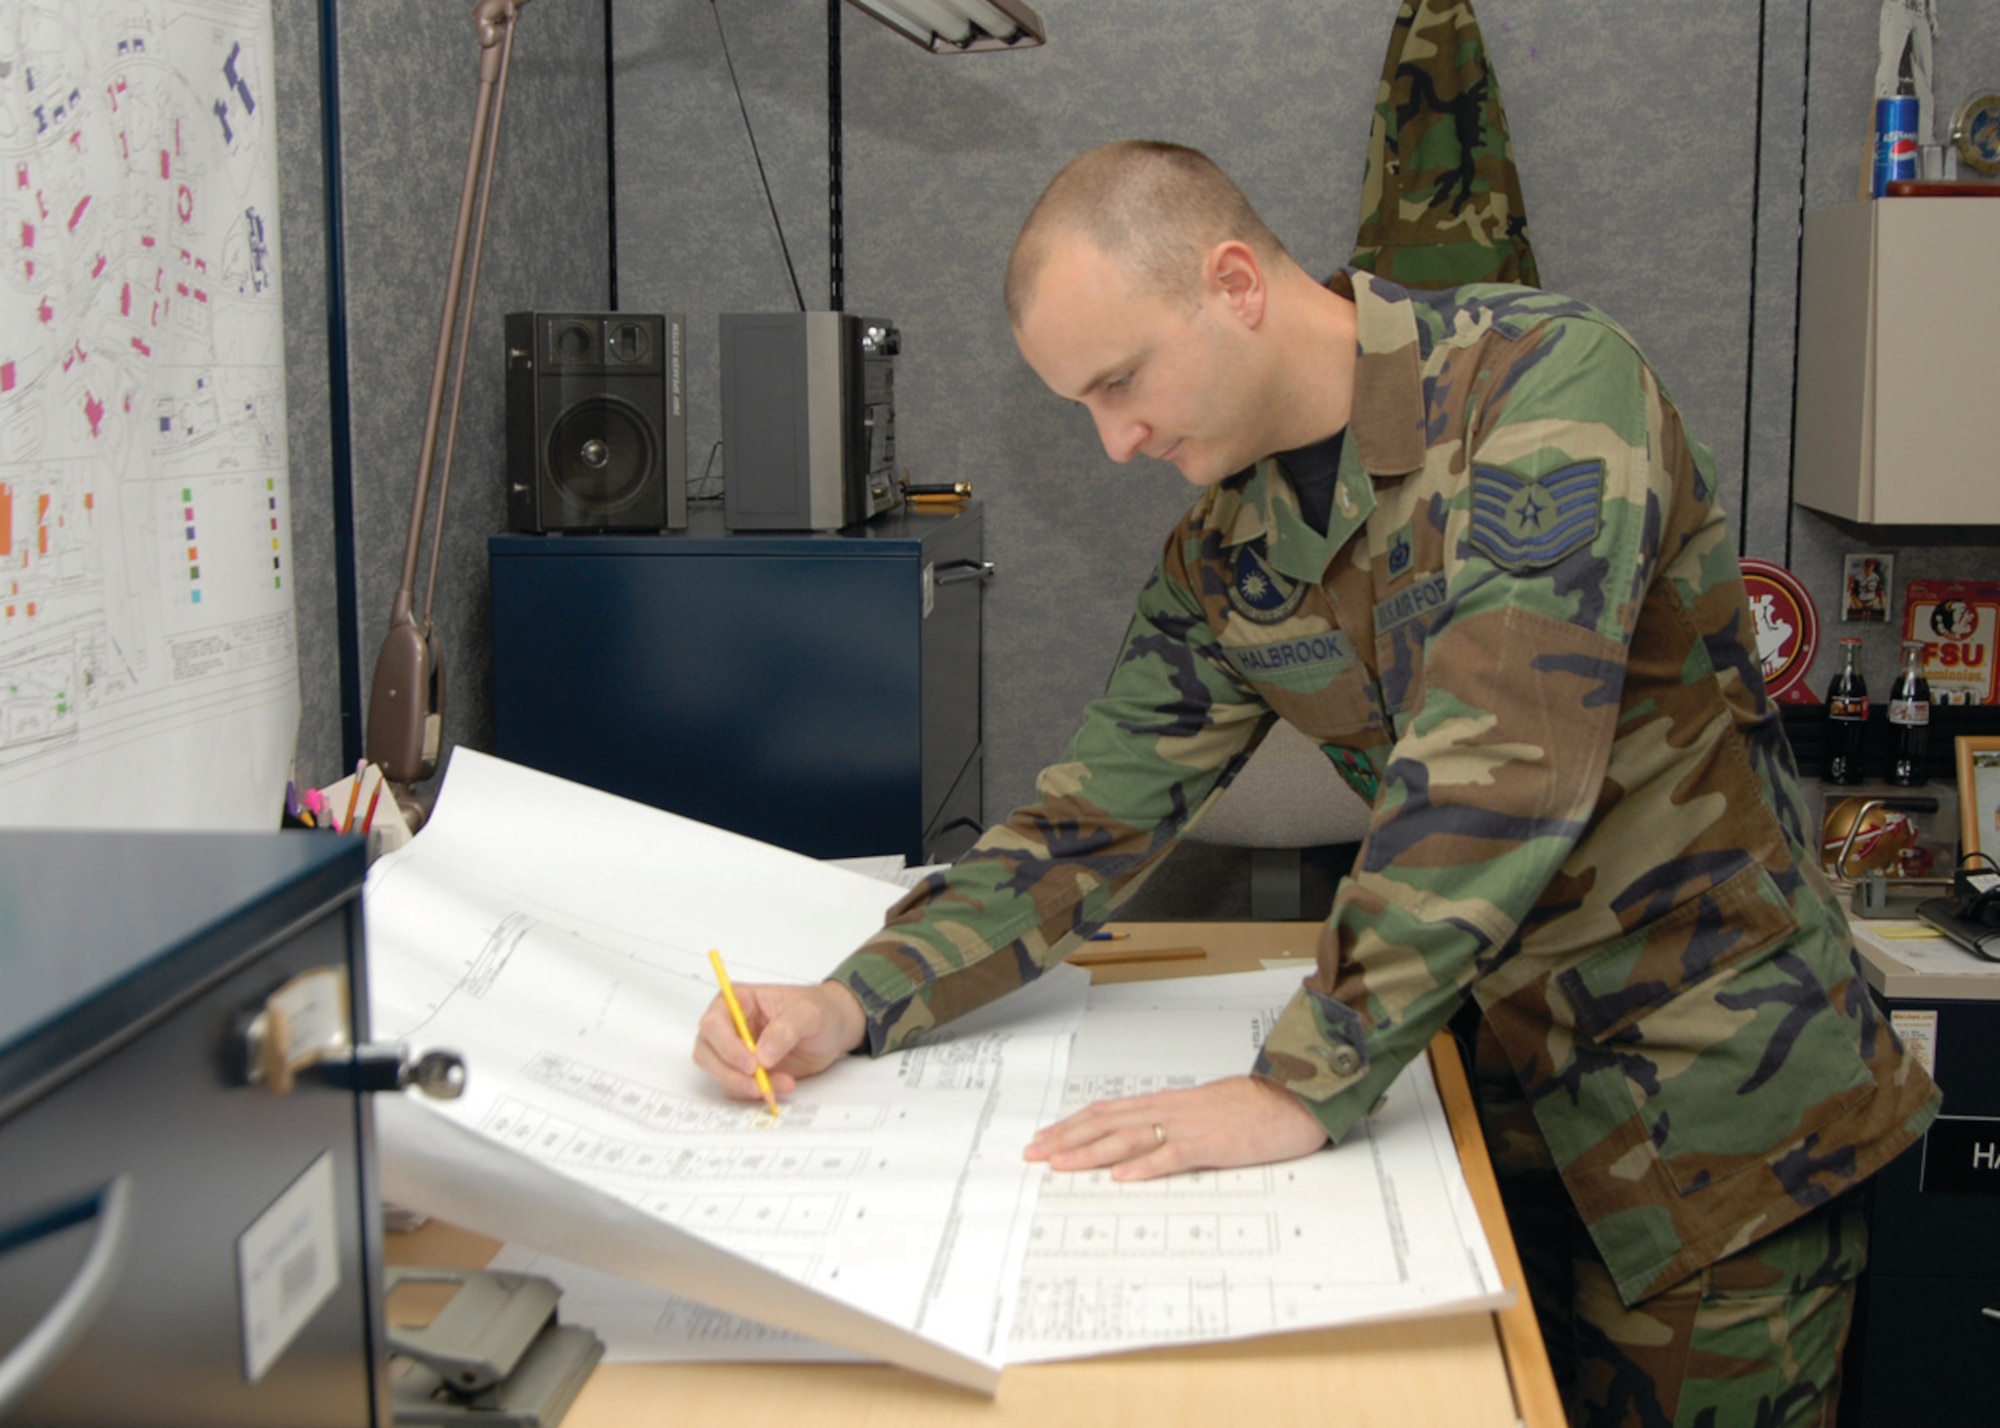 Sergeant Halbrook reviews project cable drawings for a building.